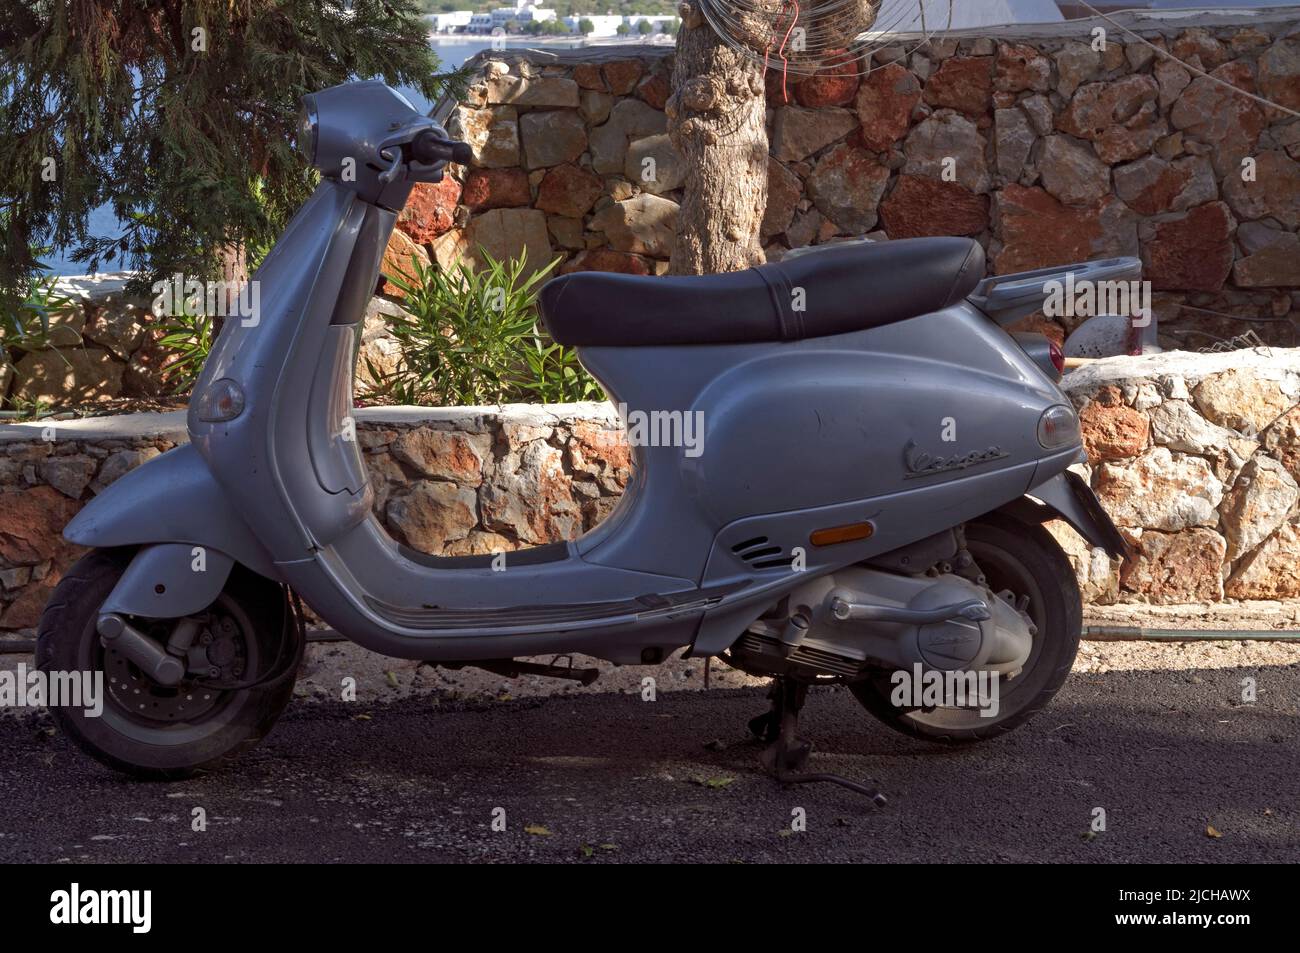 Vespa scooter parked by the roadside,, Tilos island Dodecanese, near Rhodes Greece Stock Photo